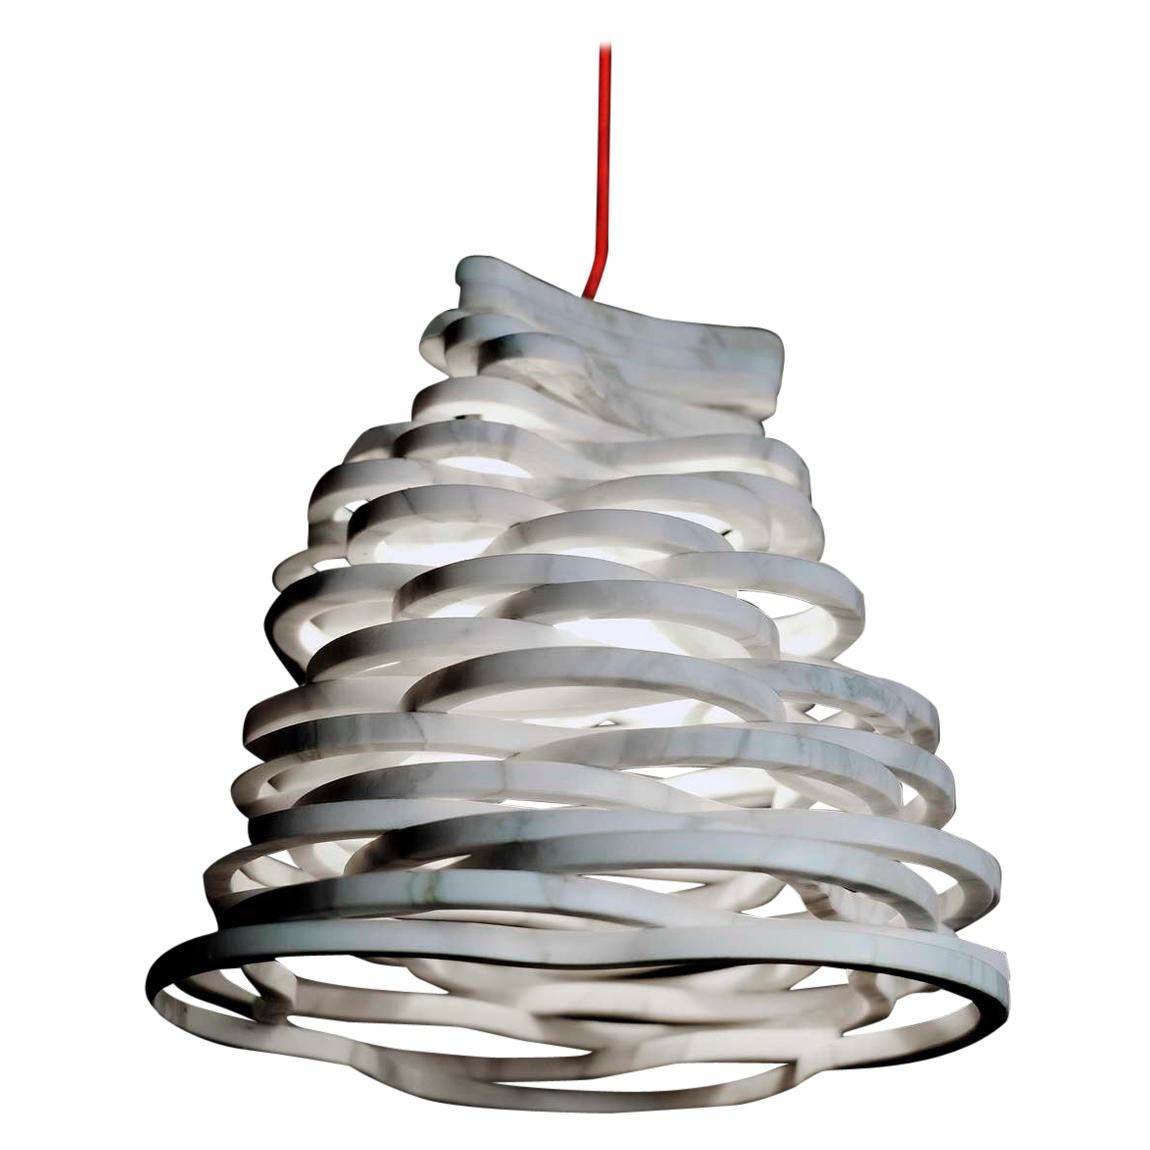 21st Century by Paolo Ullian "Annika" Pendant Lamp in White Carrara Marble For Sale